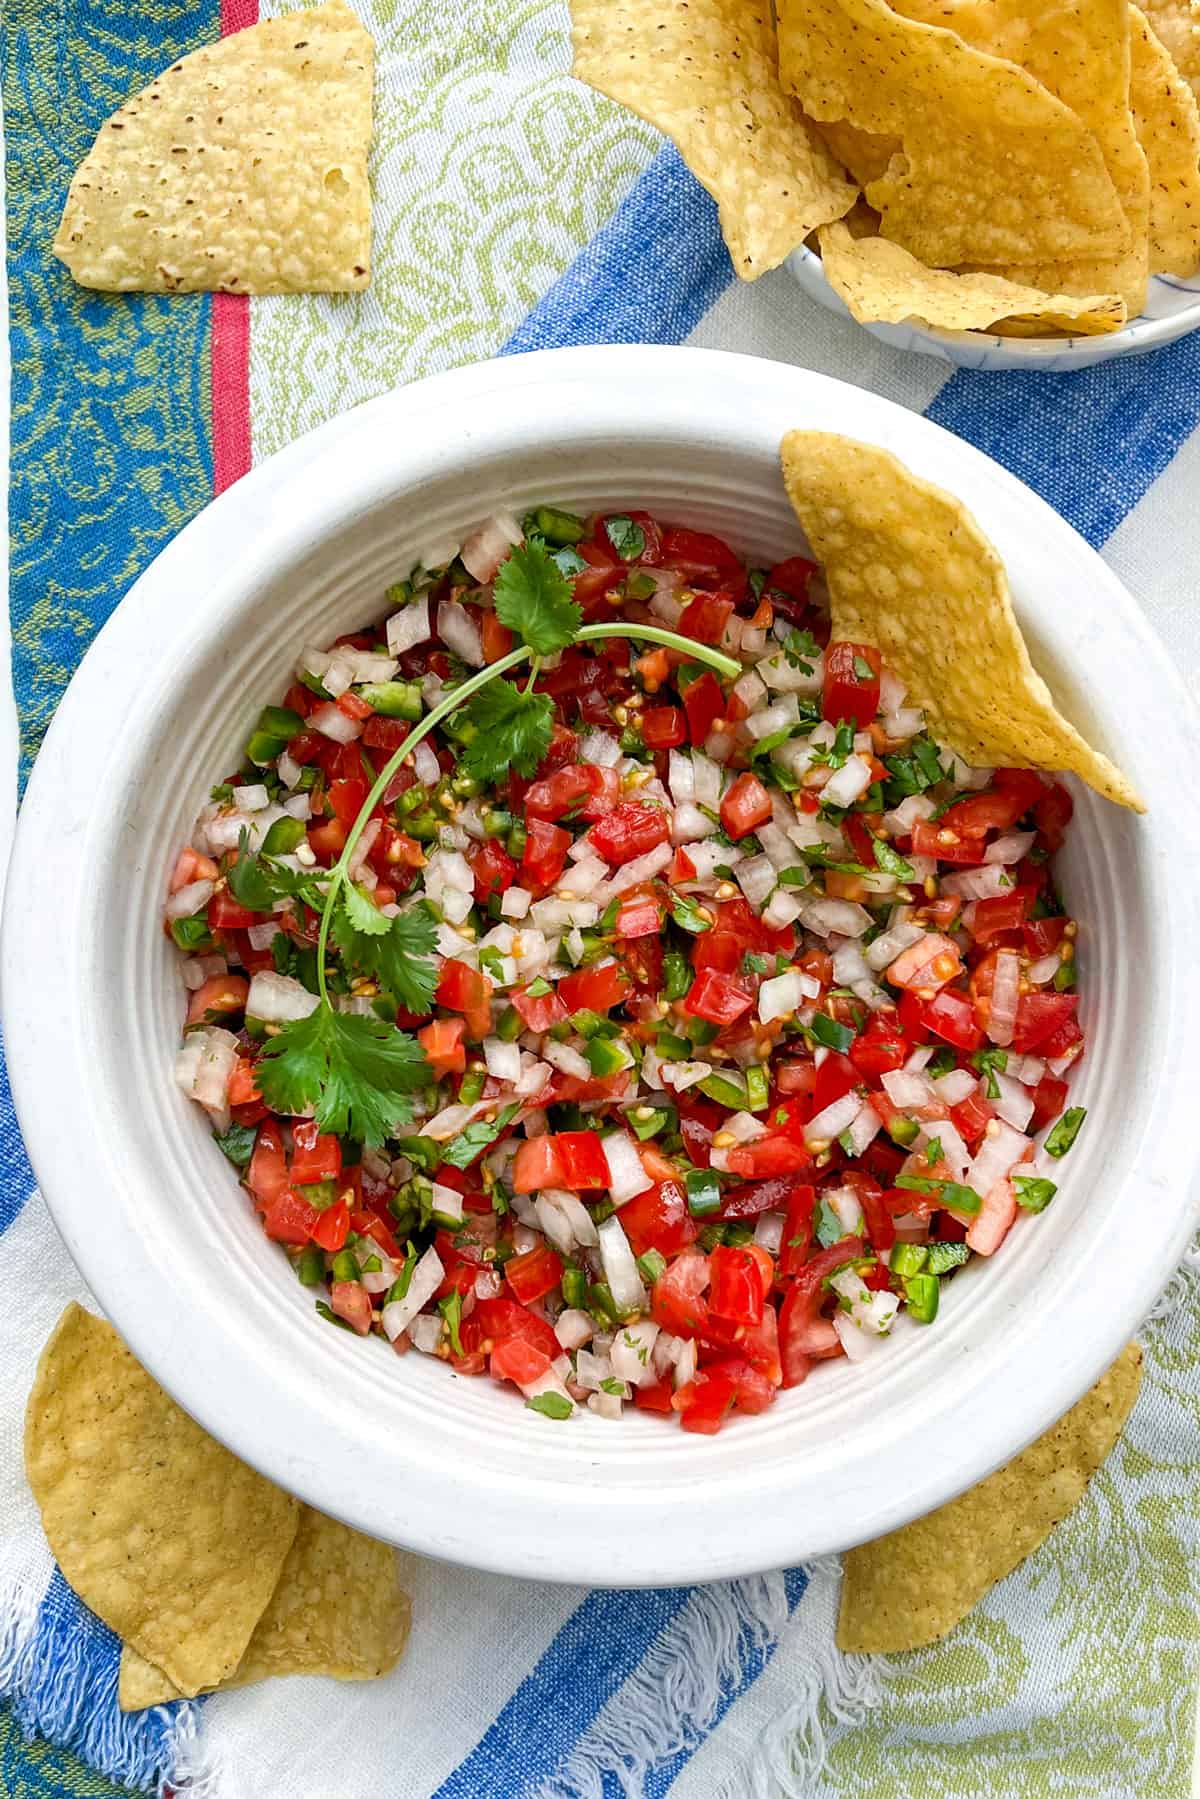 A corn tortilla chip tucked into a bowl filled with finely chopped fresh salsa made from tomatoes, chilies, onion and cilantro.